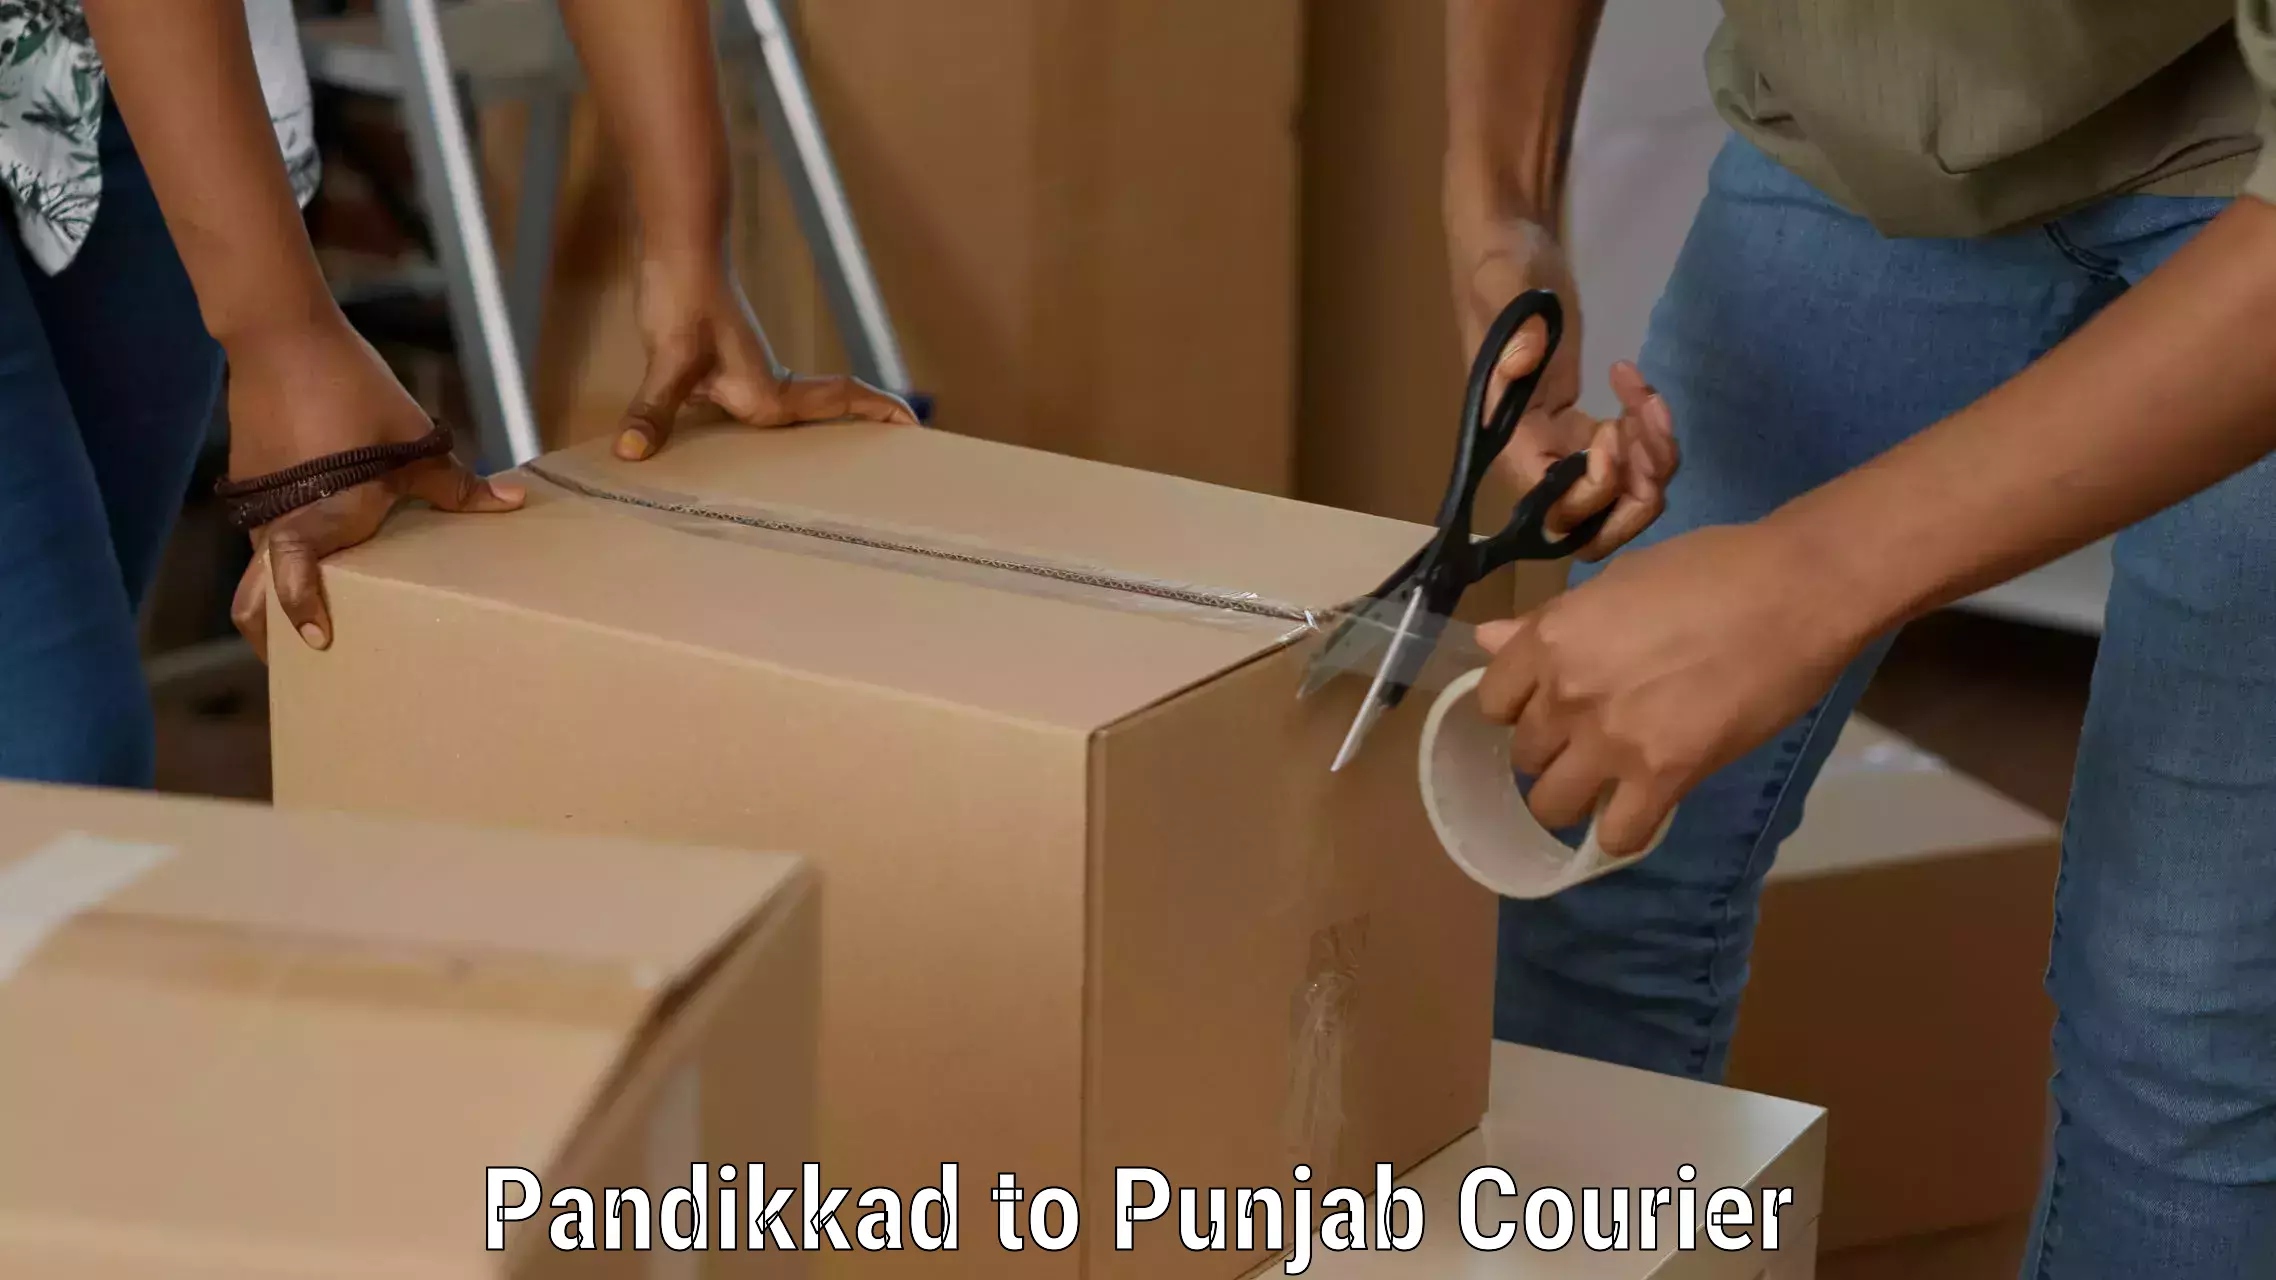 Tech-enabled shipping Pandikkad to Sultanpur Lodhi